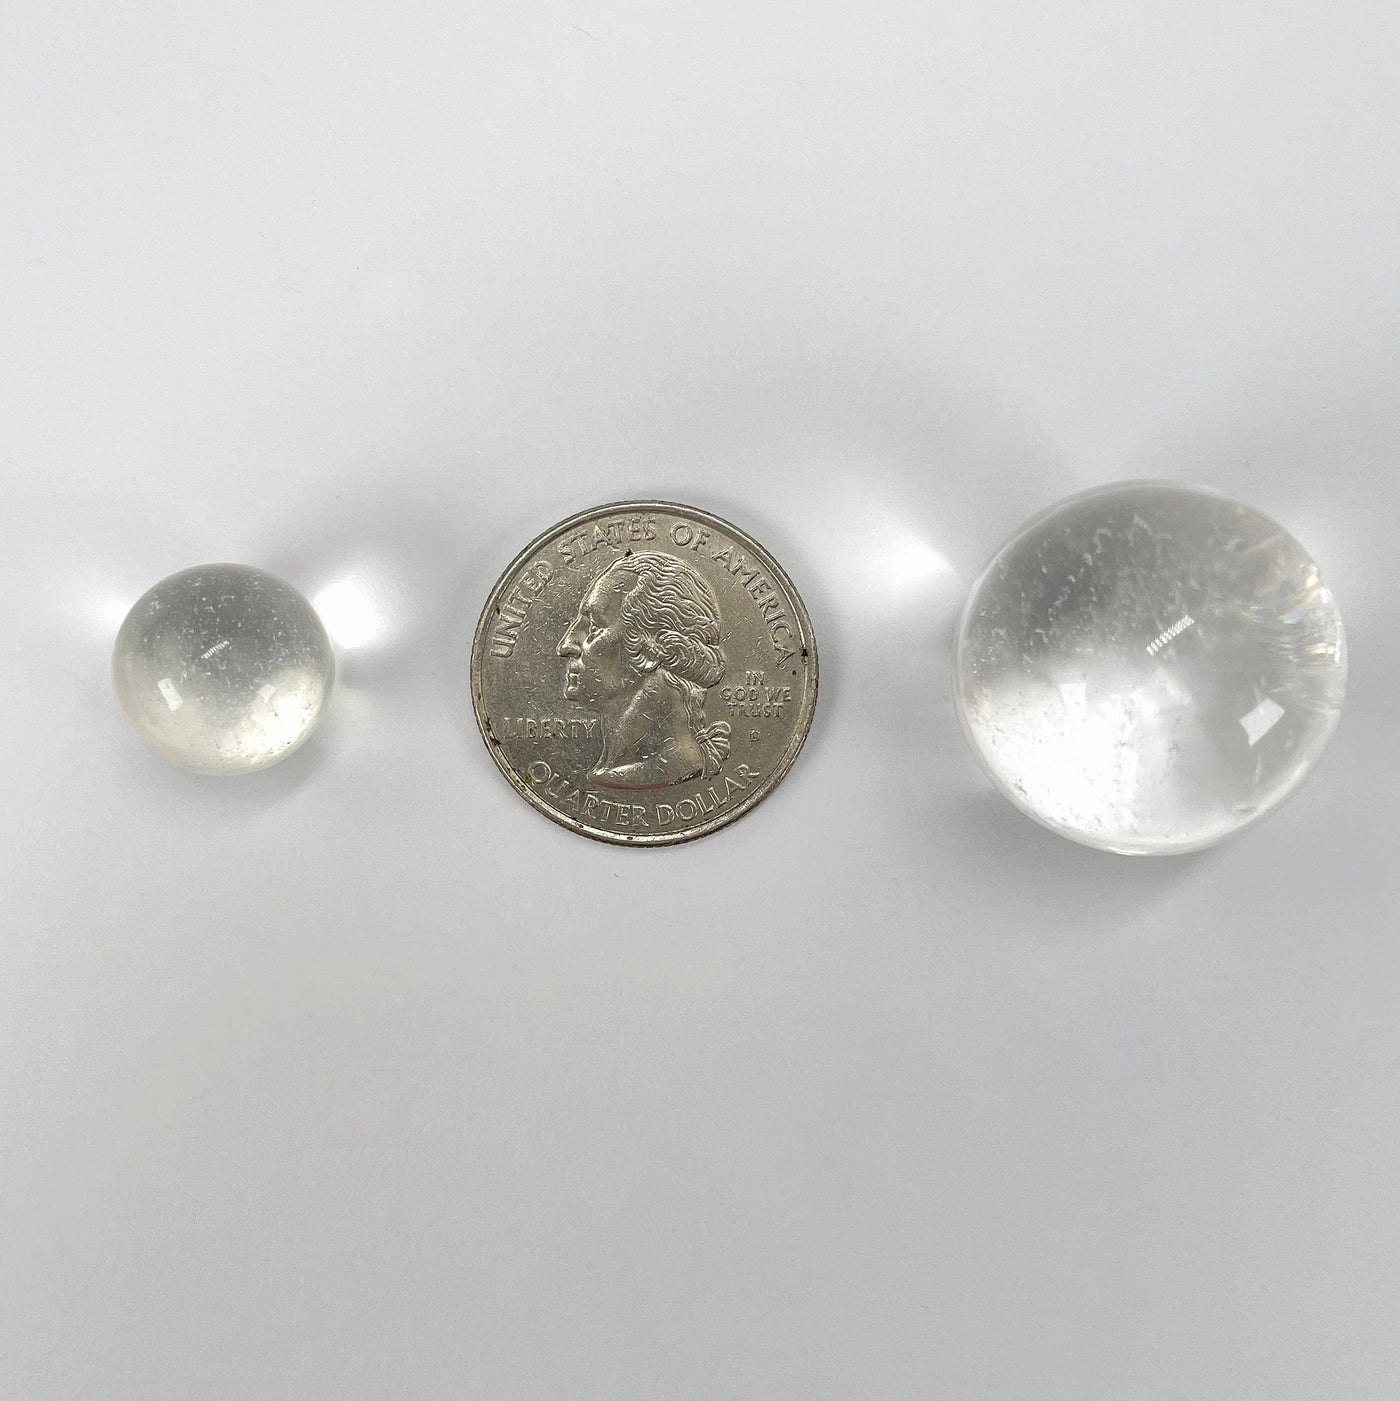 close up of approximate smallest and largest crystal quartz spheres with quarter for size reference